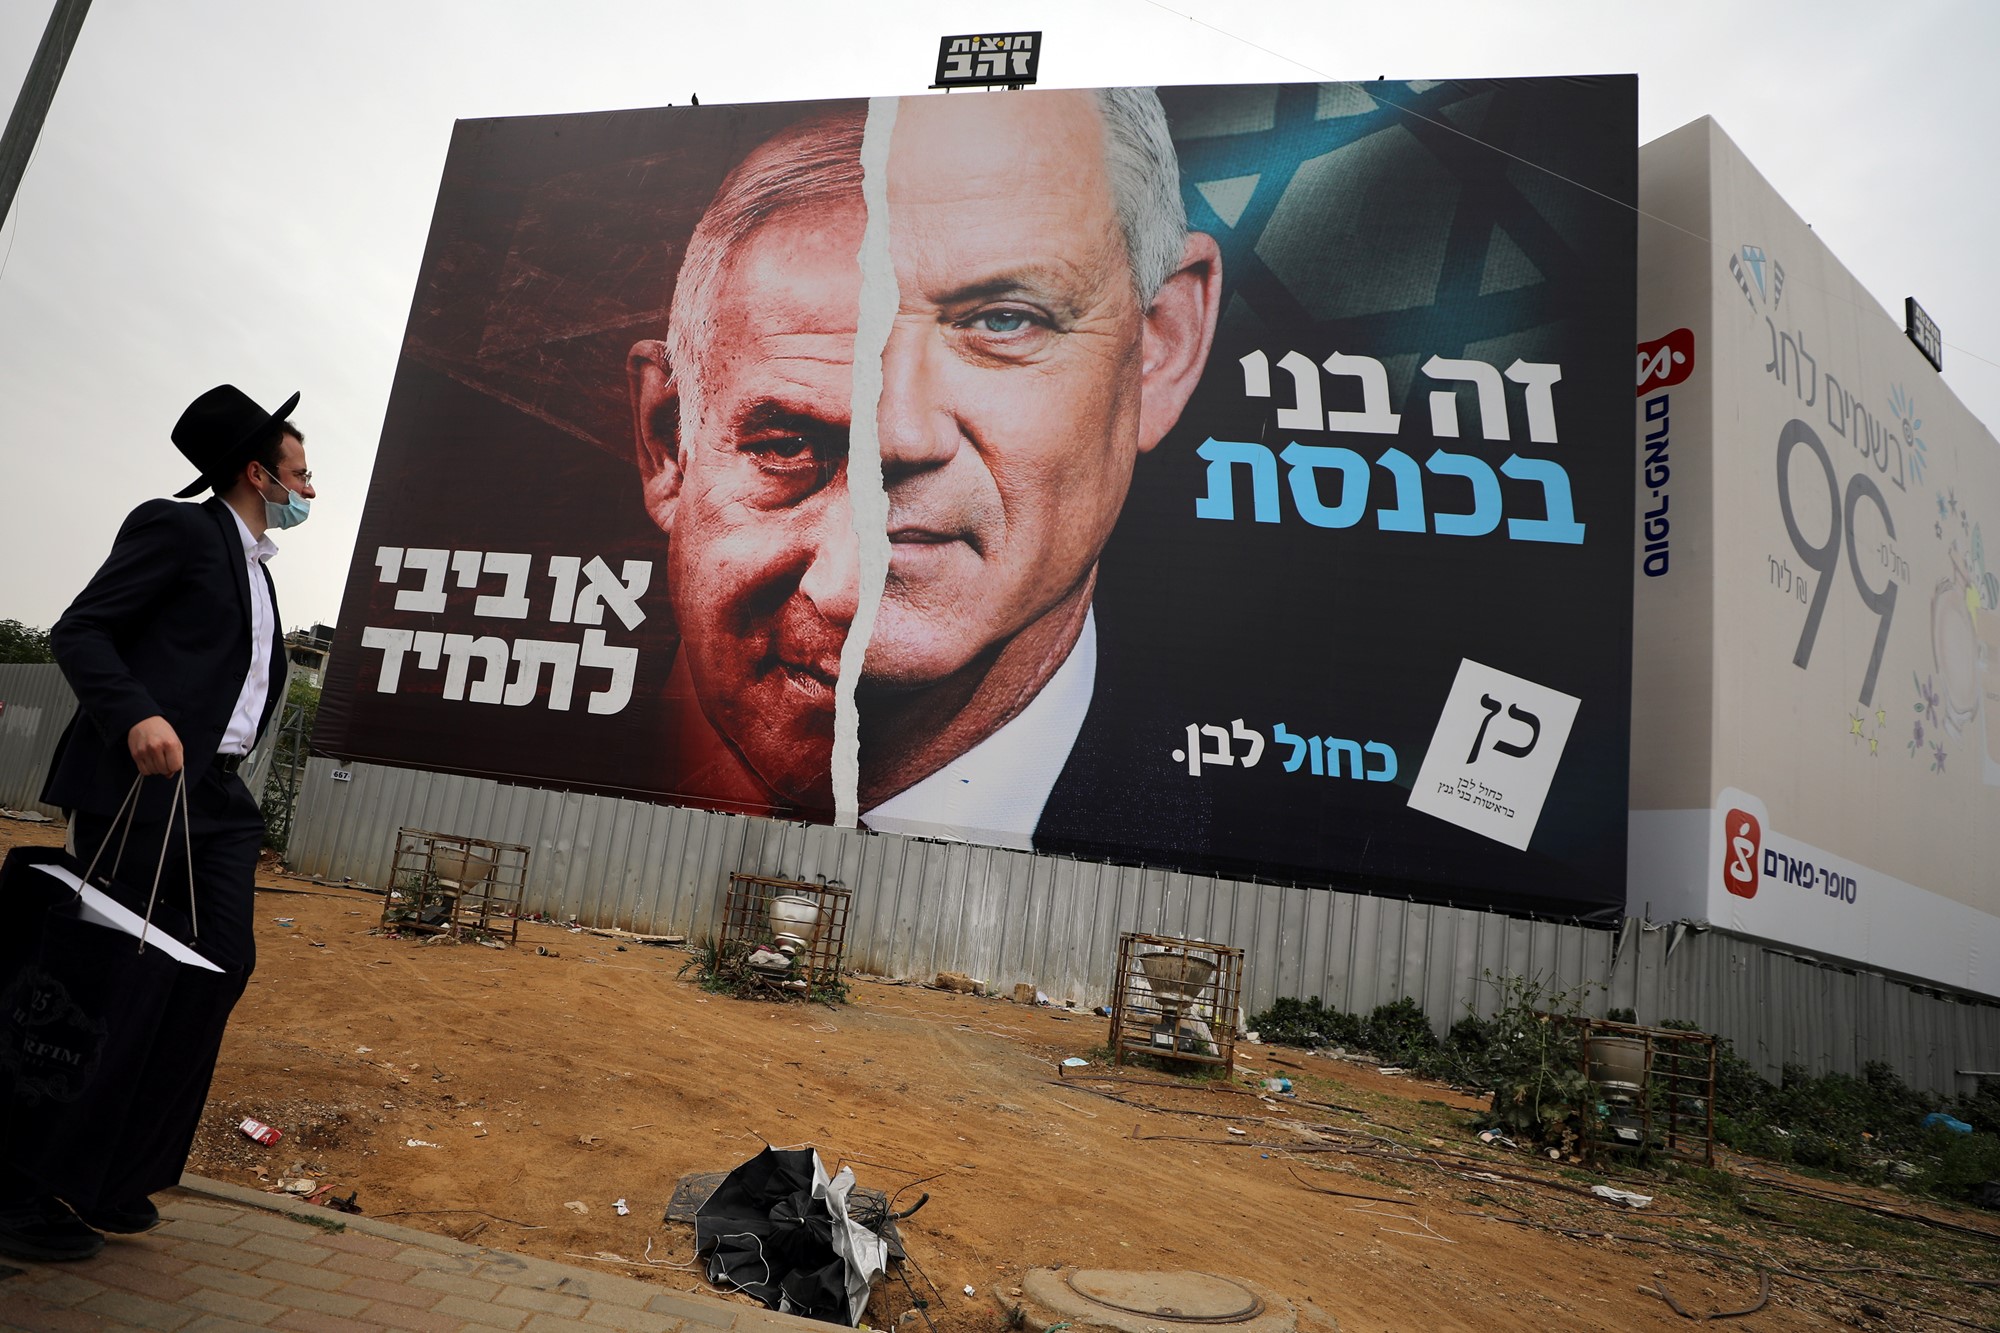 An Orthodox Jewish man stands beside a large billboard showing the faces of Benjamin Netanyahu and Benny Gantz, split down the middle.